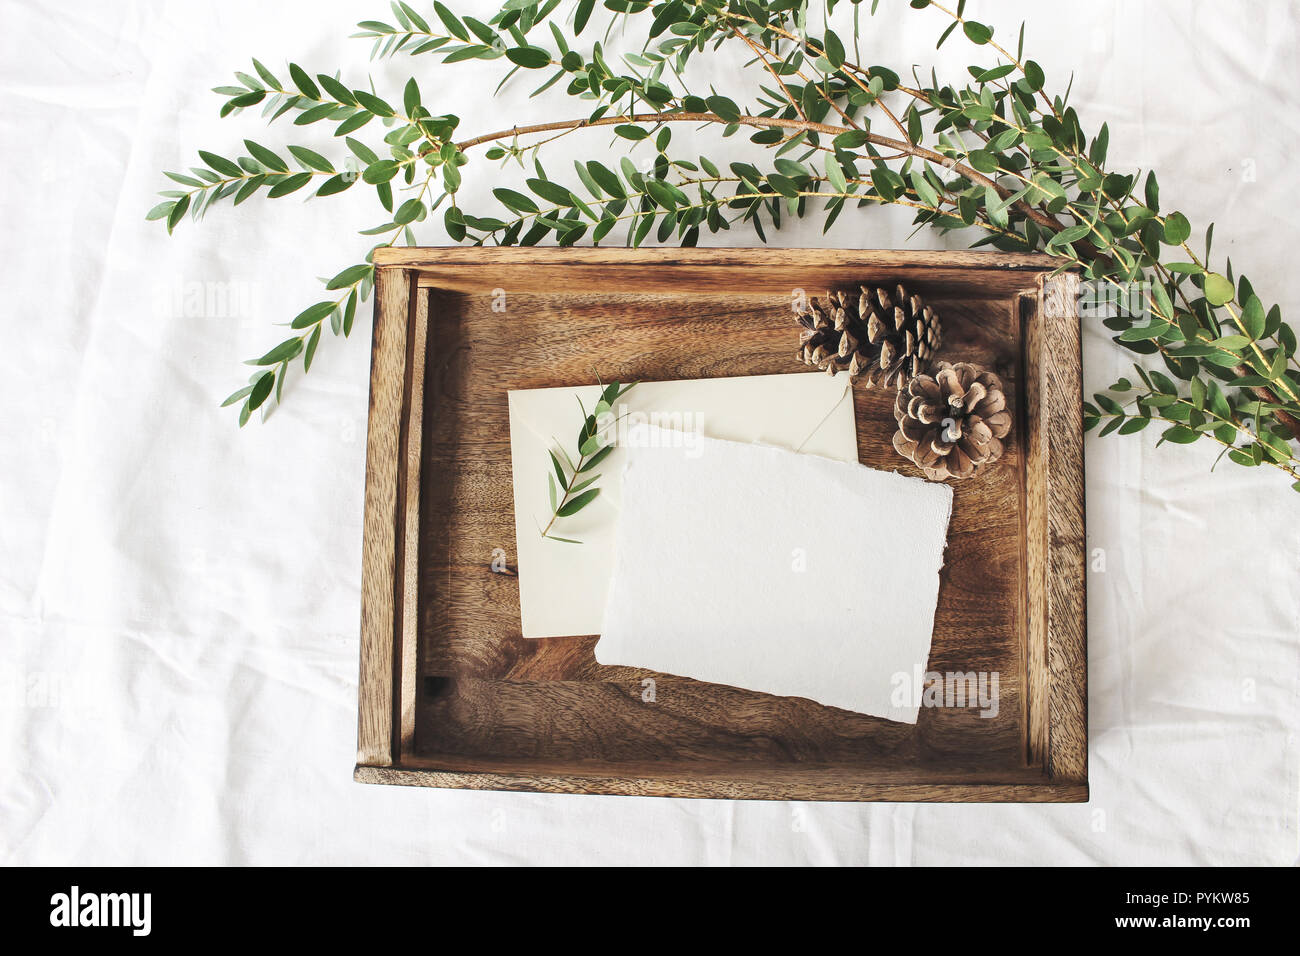 Christmas or winter wedding mock-up scene. Blank cotton paper greeting cards, old wooden tray, pine cones and green Eucalyptus parvifolia branch.White bed linen background. Flat lay, top view. Stock Photo